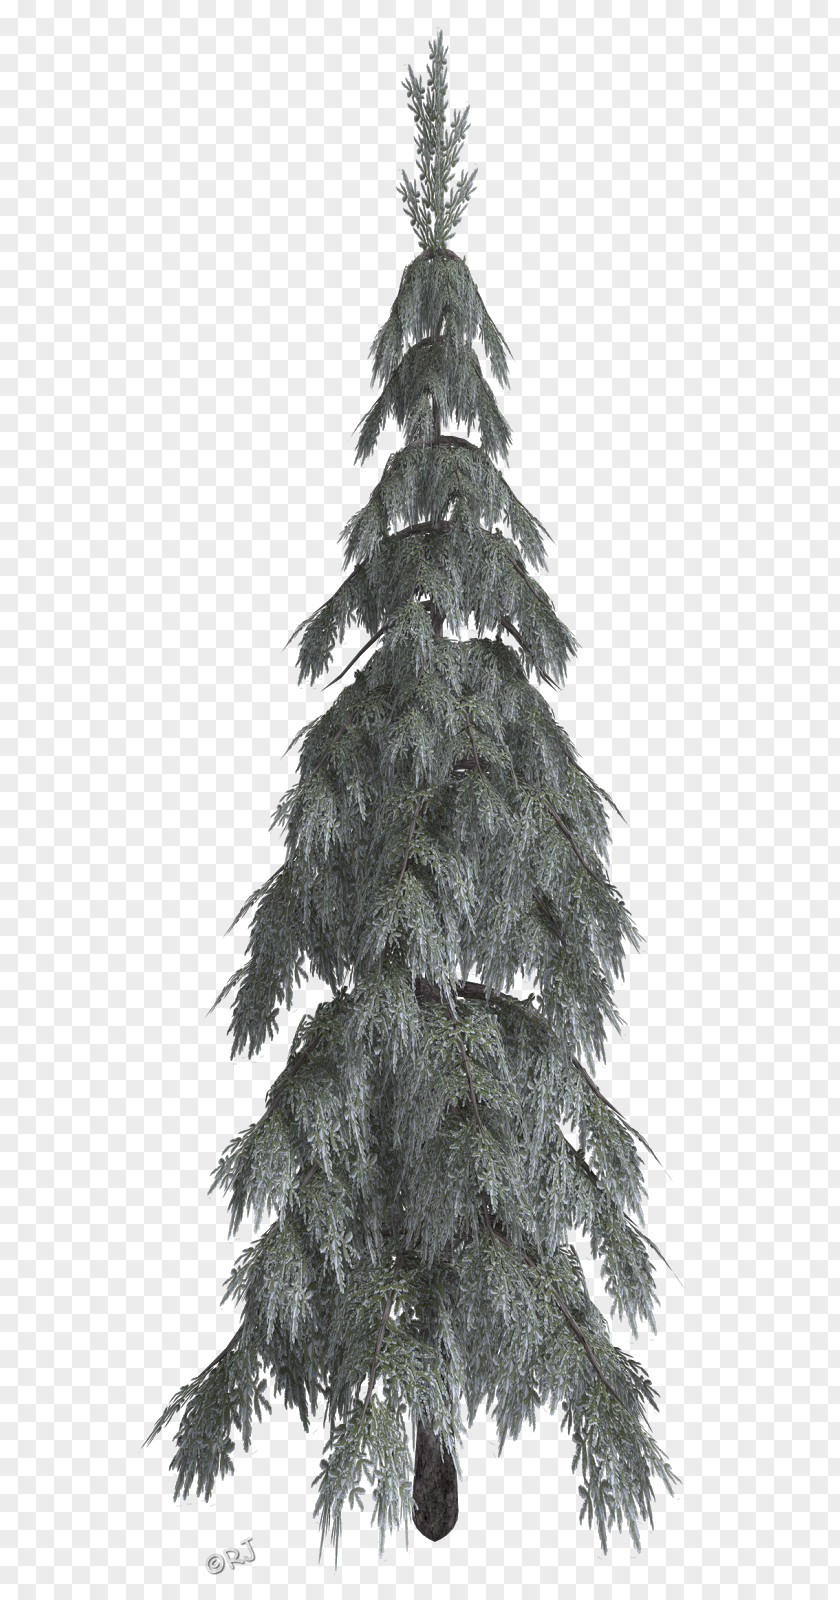 Winter Trees Christmas Tree Spruce Fir Pine PNG